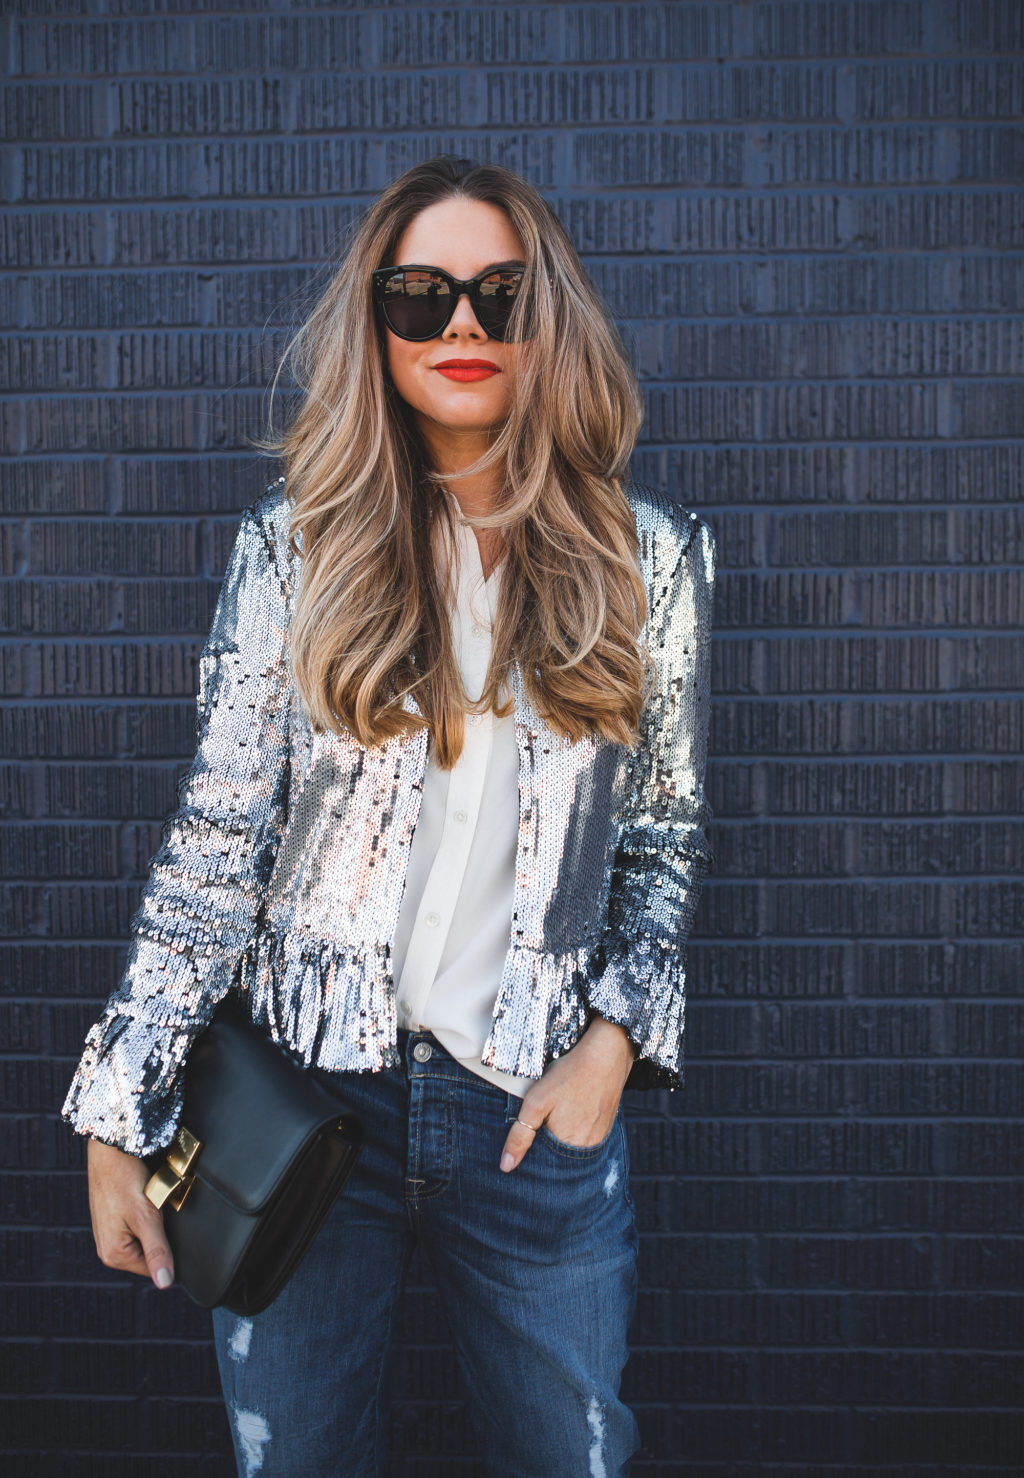 denim and sparkle outfit